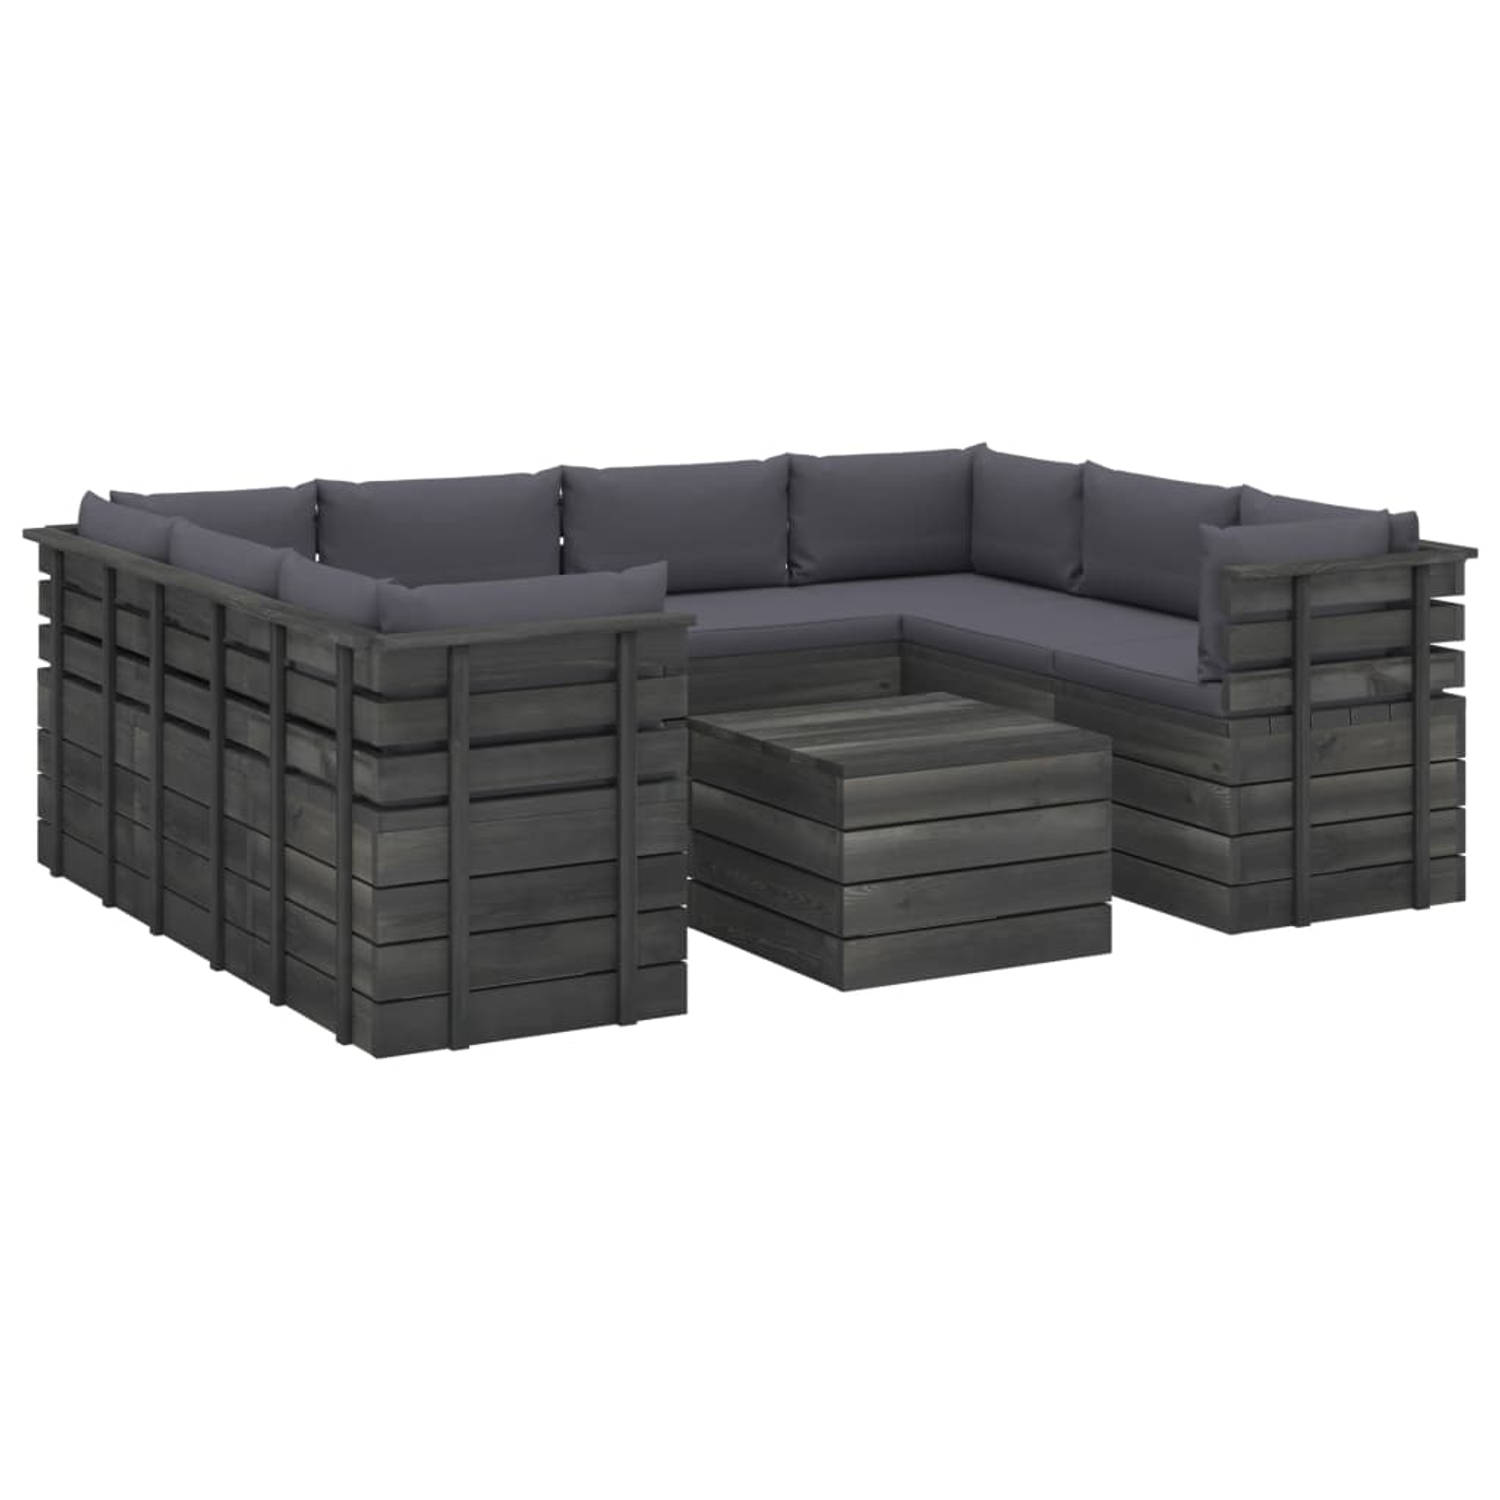 Blokker Tuinsets - The Living Store Tuinset - Pallet - Hout - Grenenhout - Antraciet - 60x65x71.5 (BxDxH) - 100% polyester aanbieding